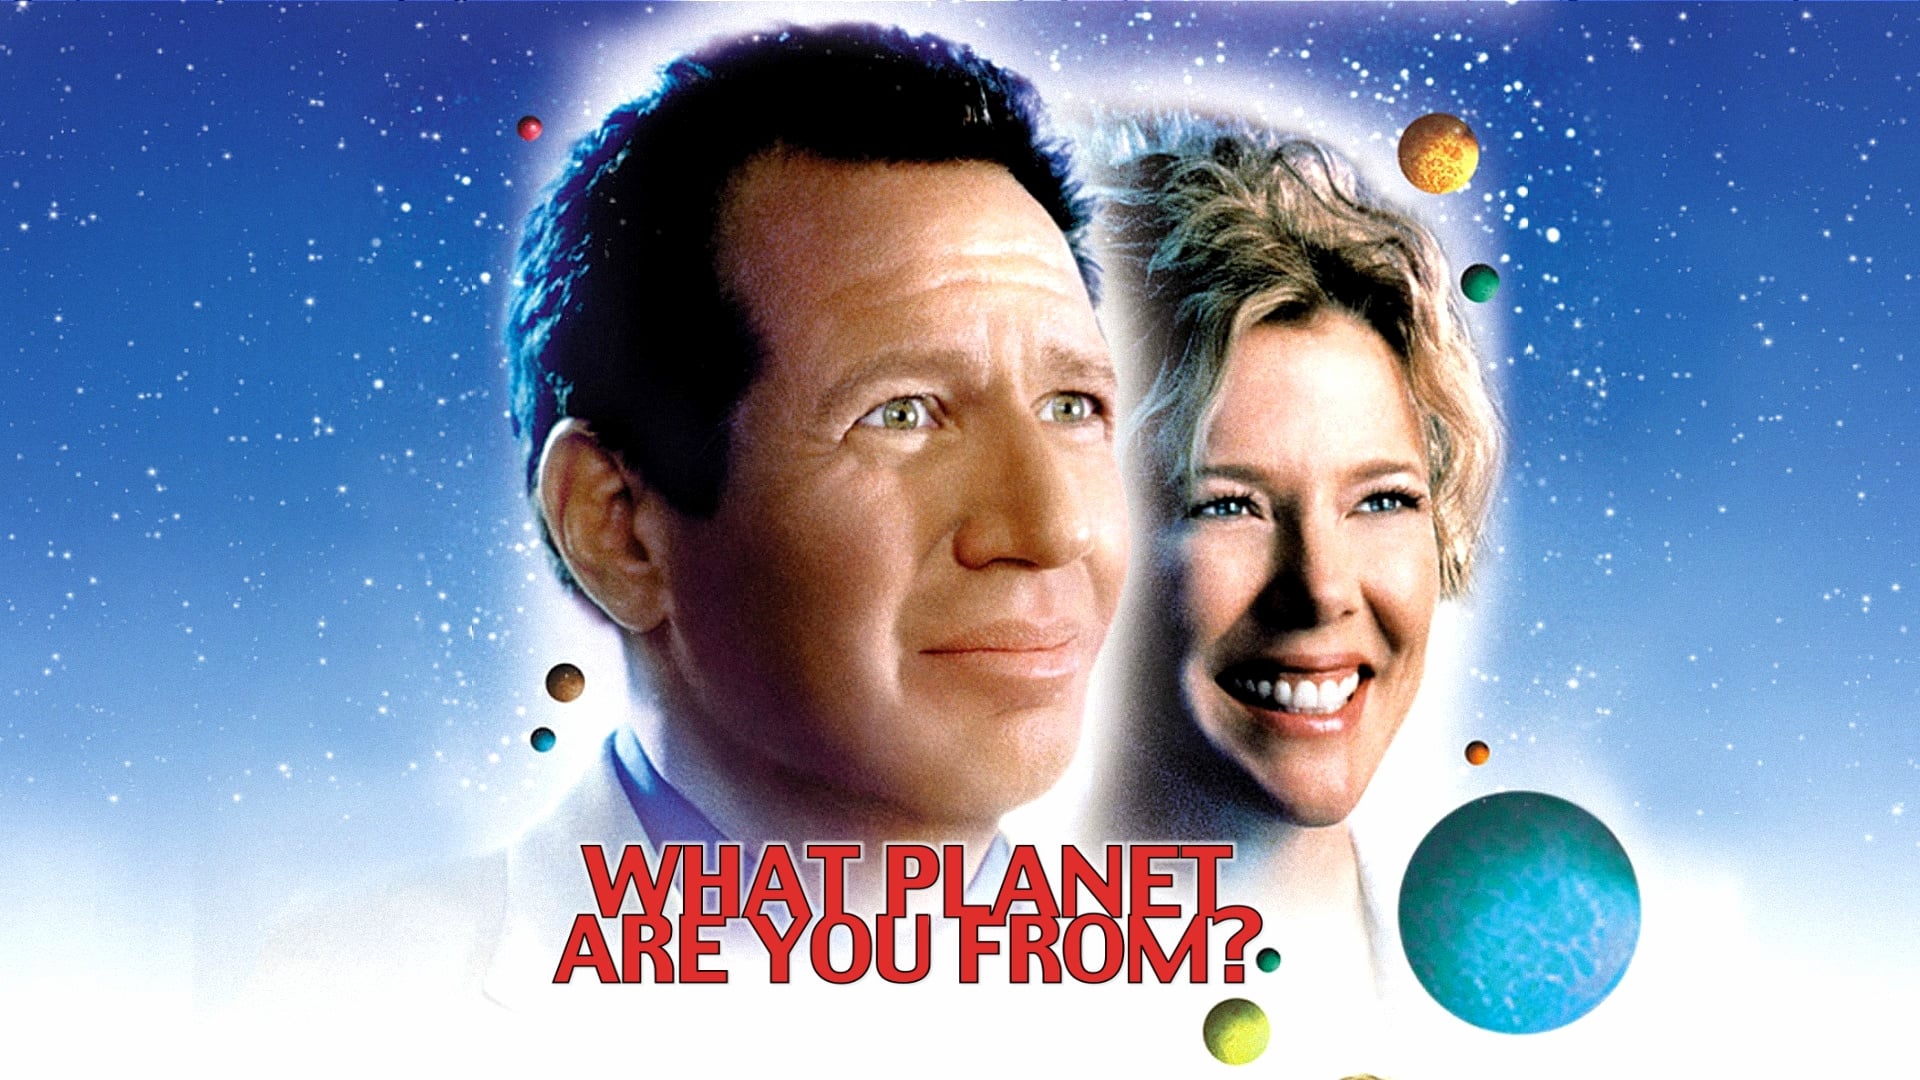 What Planet Are You From?